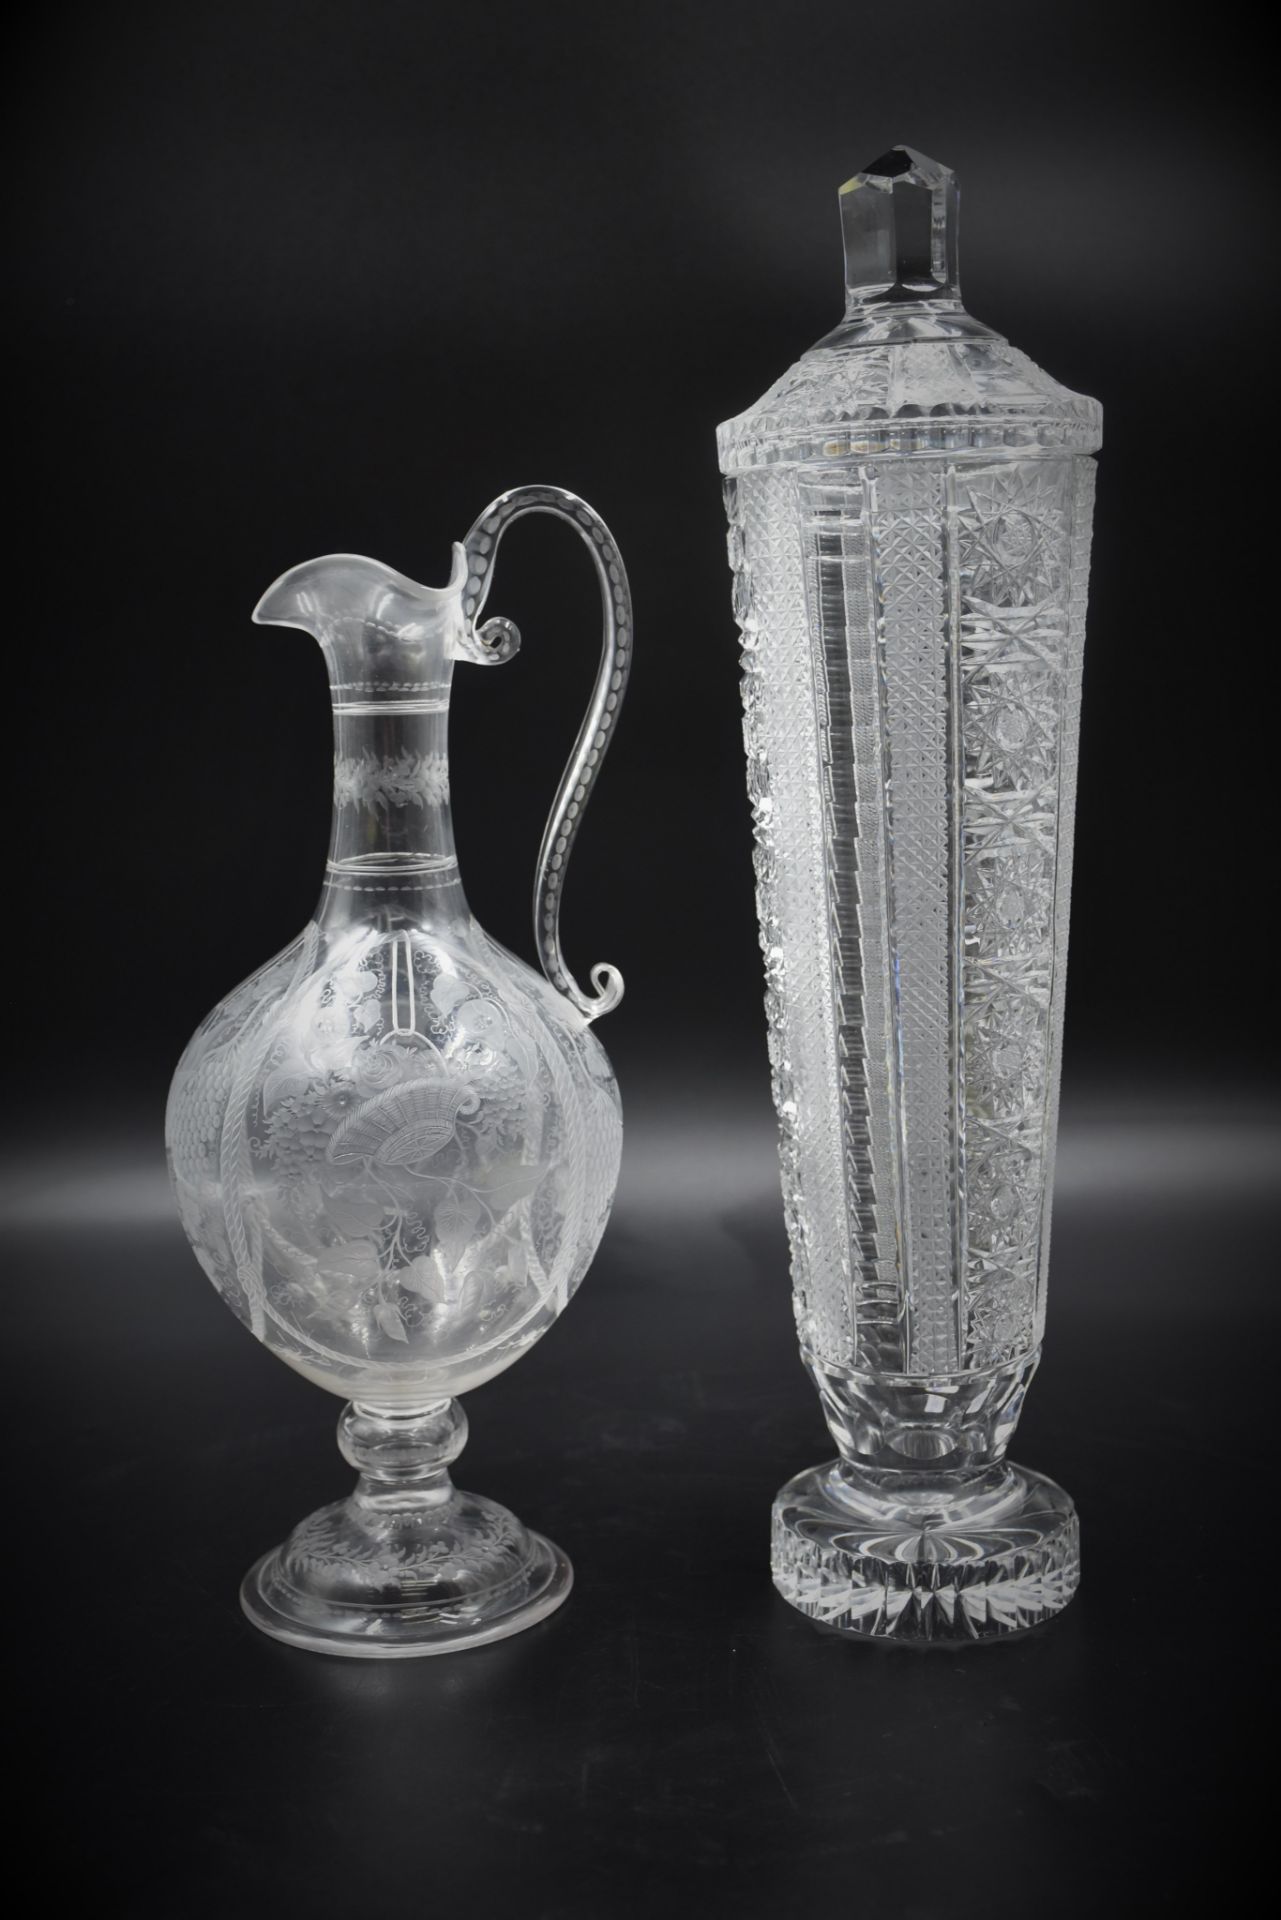 Crystal decanter engraved with the wheel of flowered baskets. Beginning of the XIXth century. Height